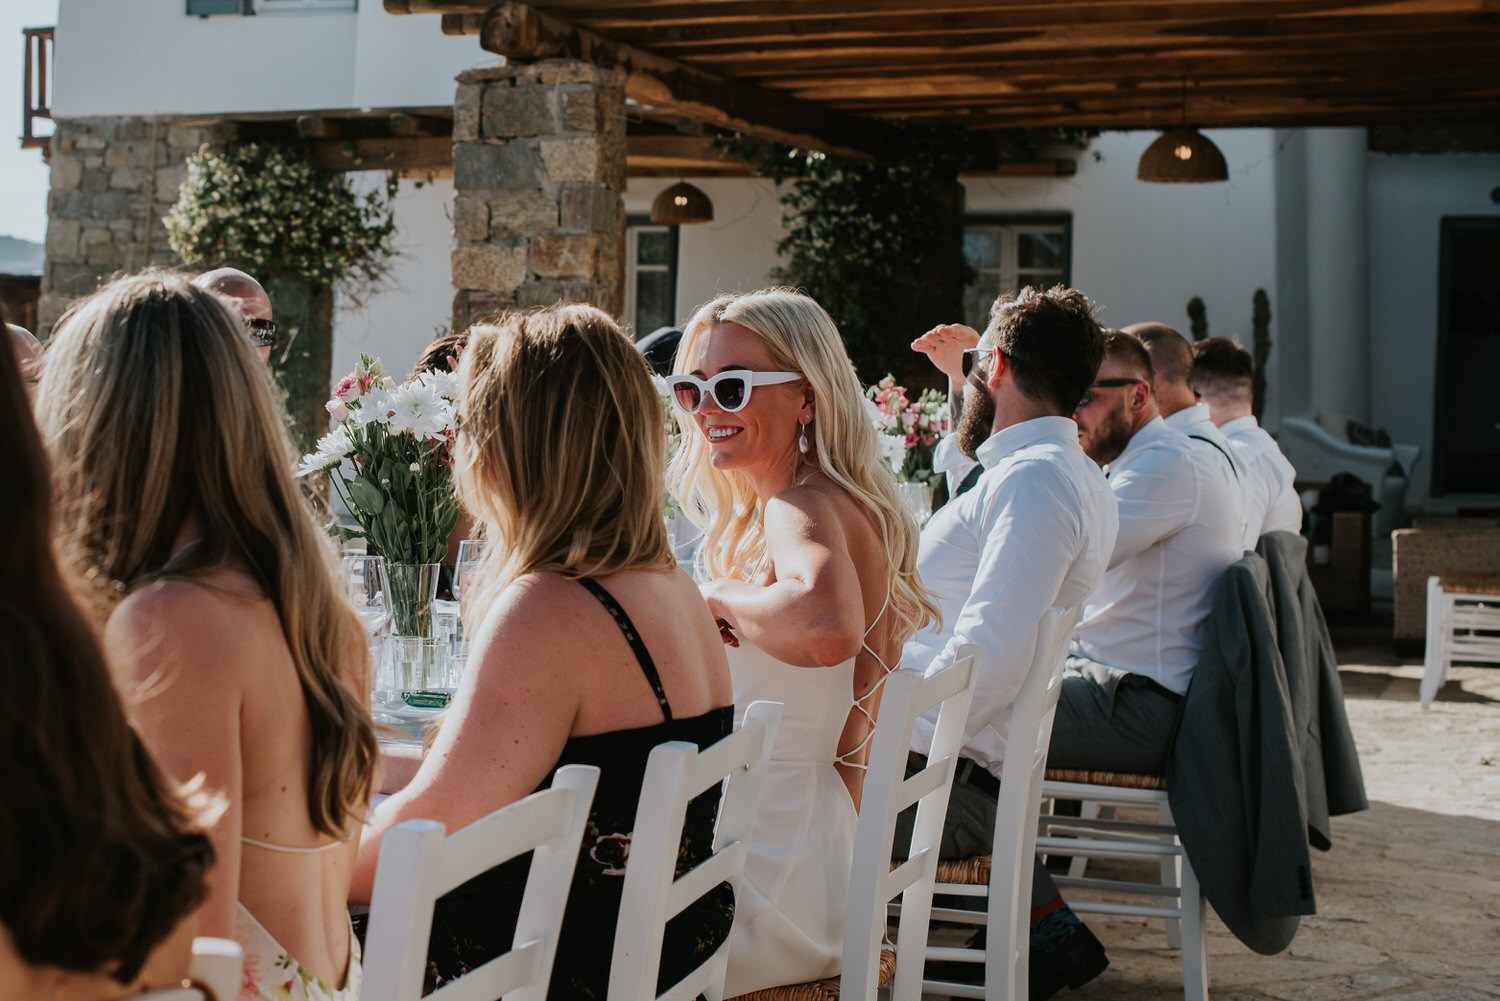 Mykonos wedding photographer: accent on bride at the long reception table surrounded by guests in the afternoon sun.